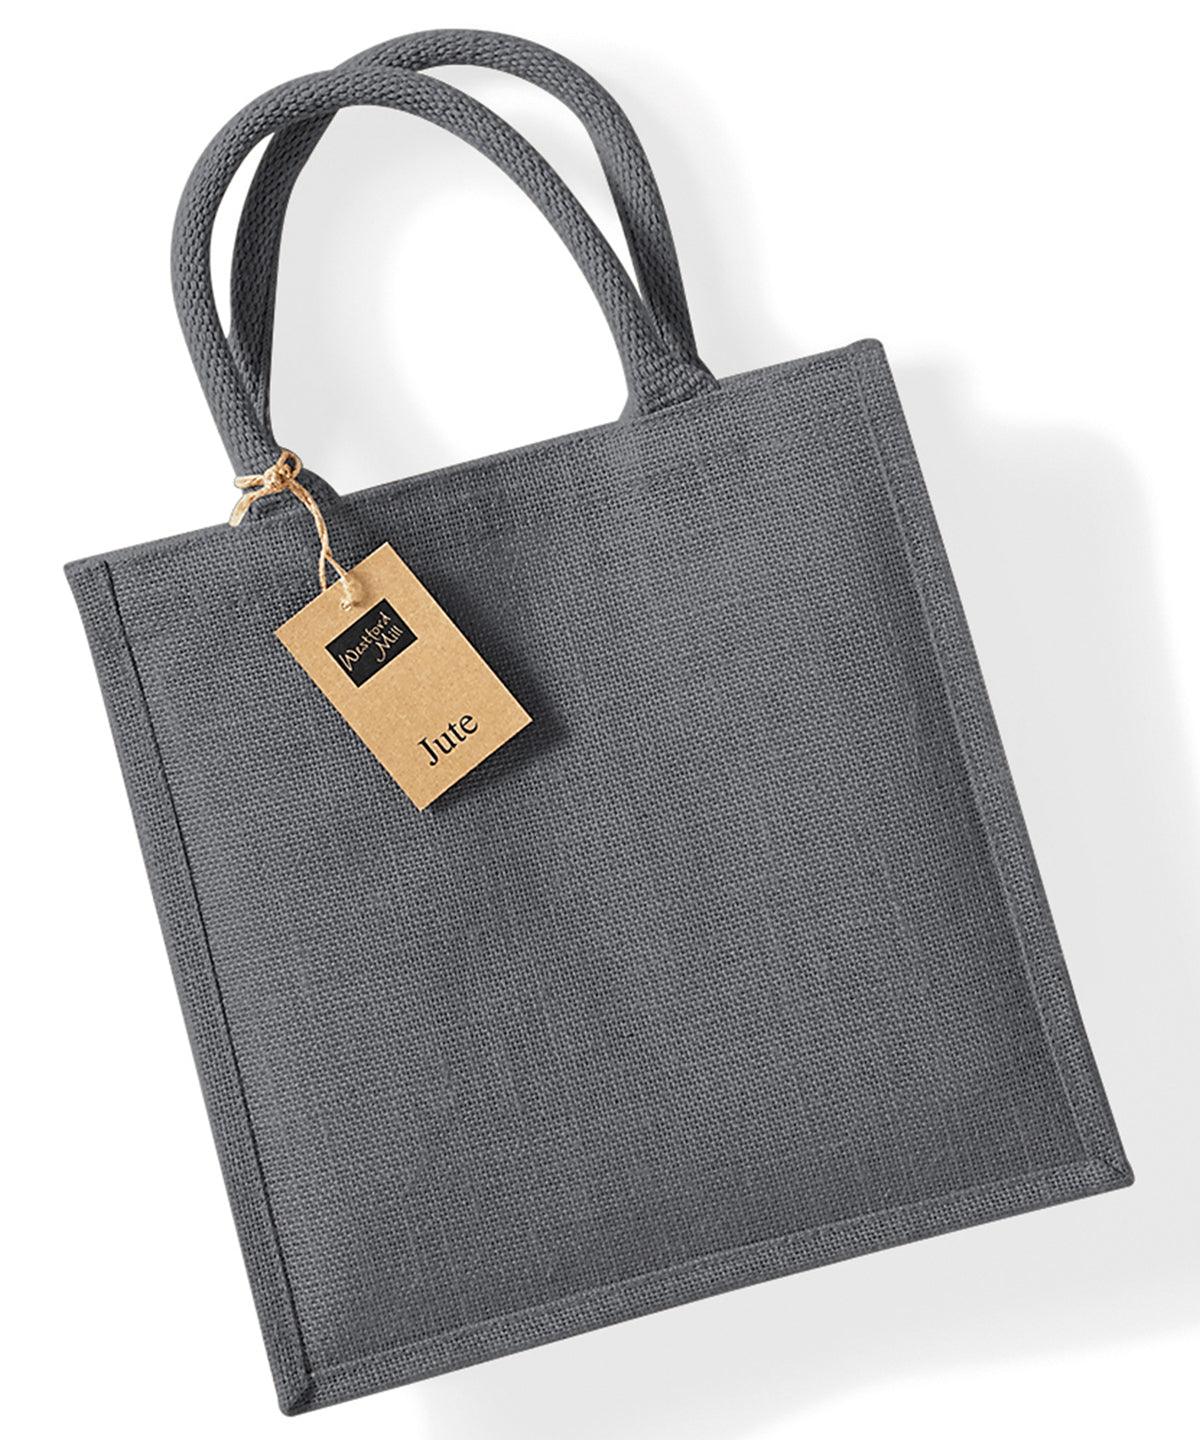 Graphite Grey/Graphite Grey - Jute midi tote Bags Westford Mill Bags & Luggage Schoolwear Centres